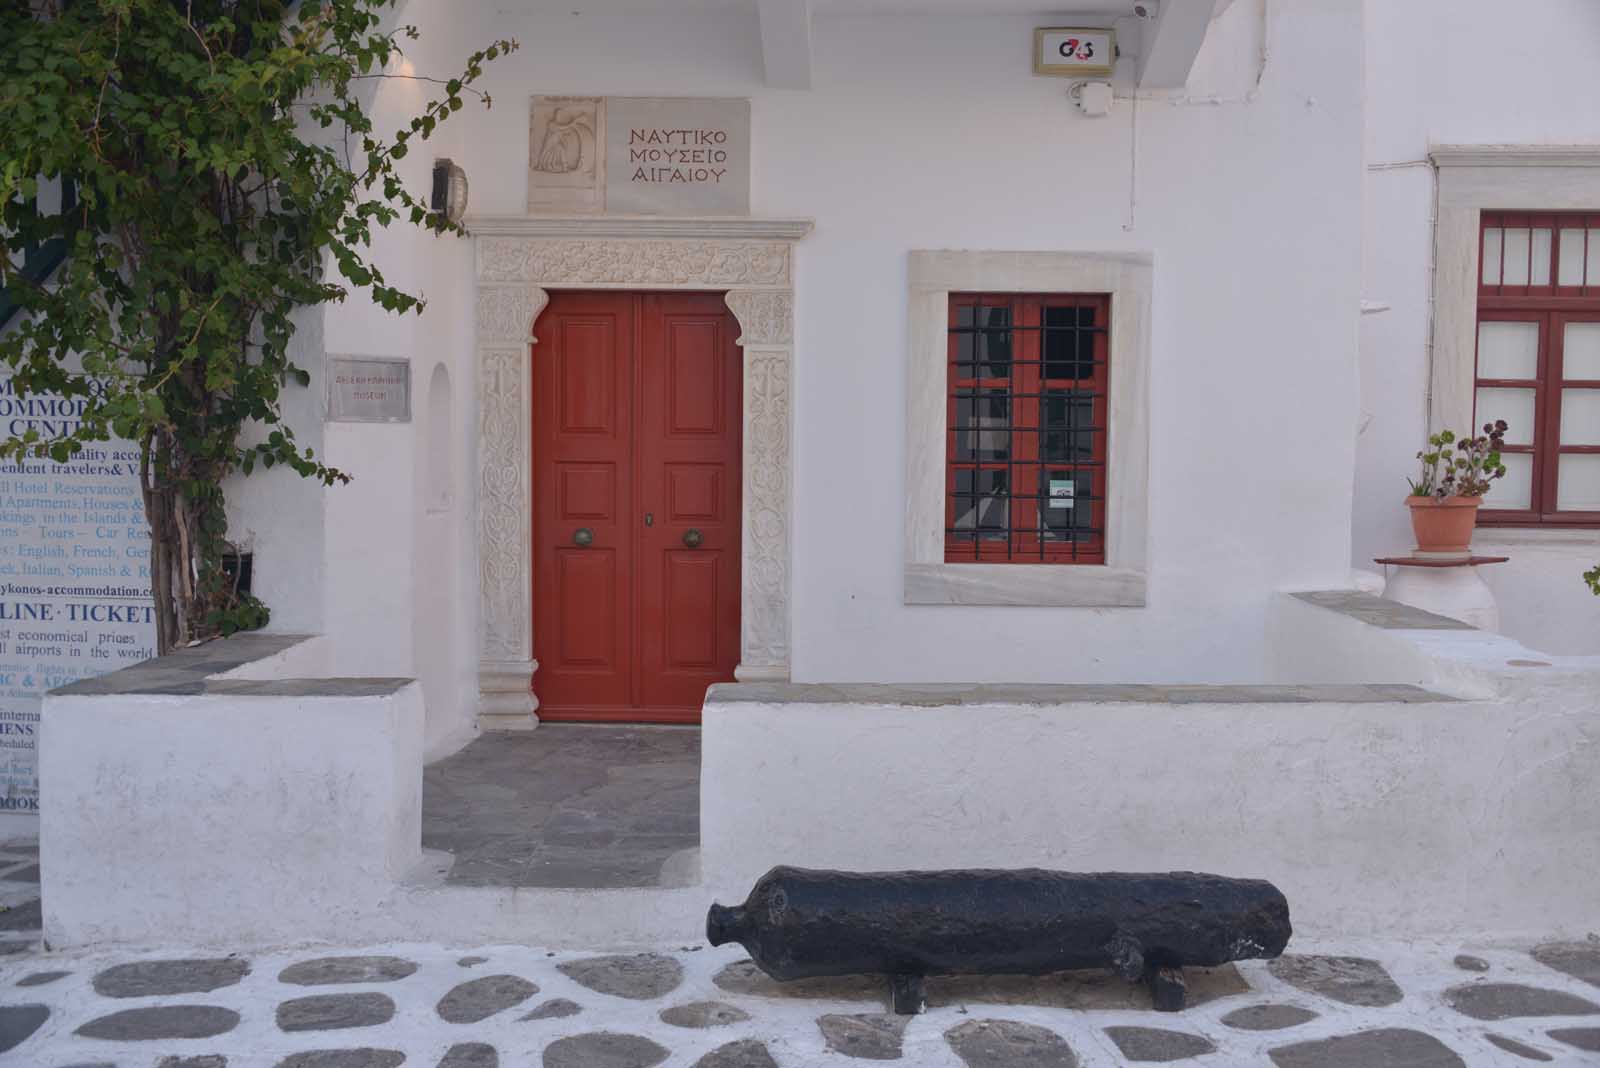 Cool things to do in Mykonos Aegean Maritime Museum